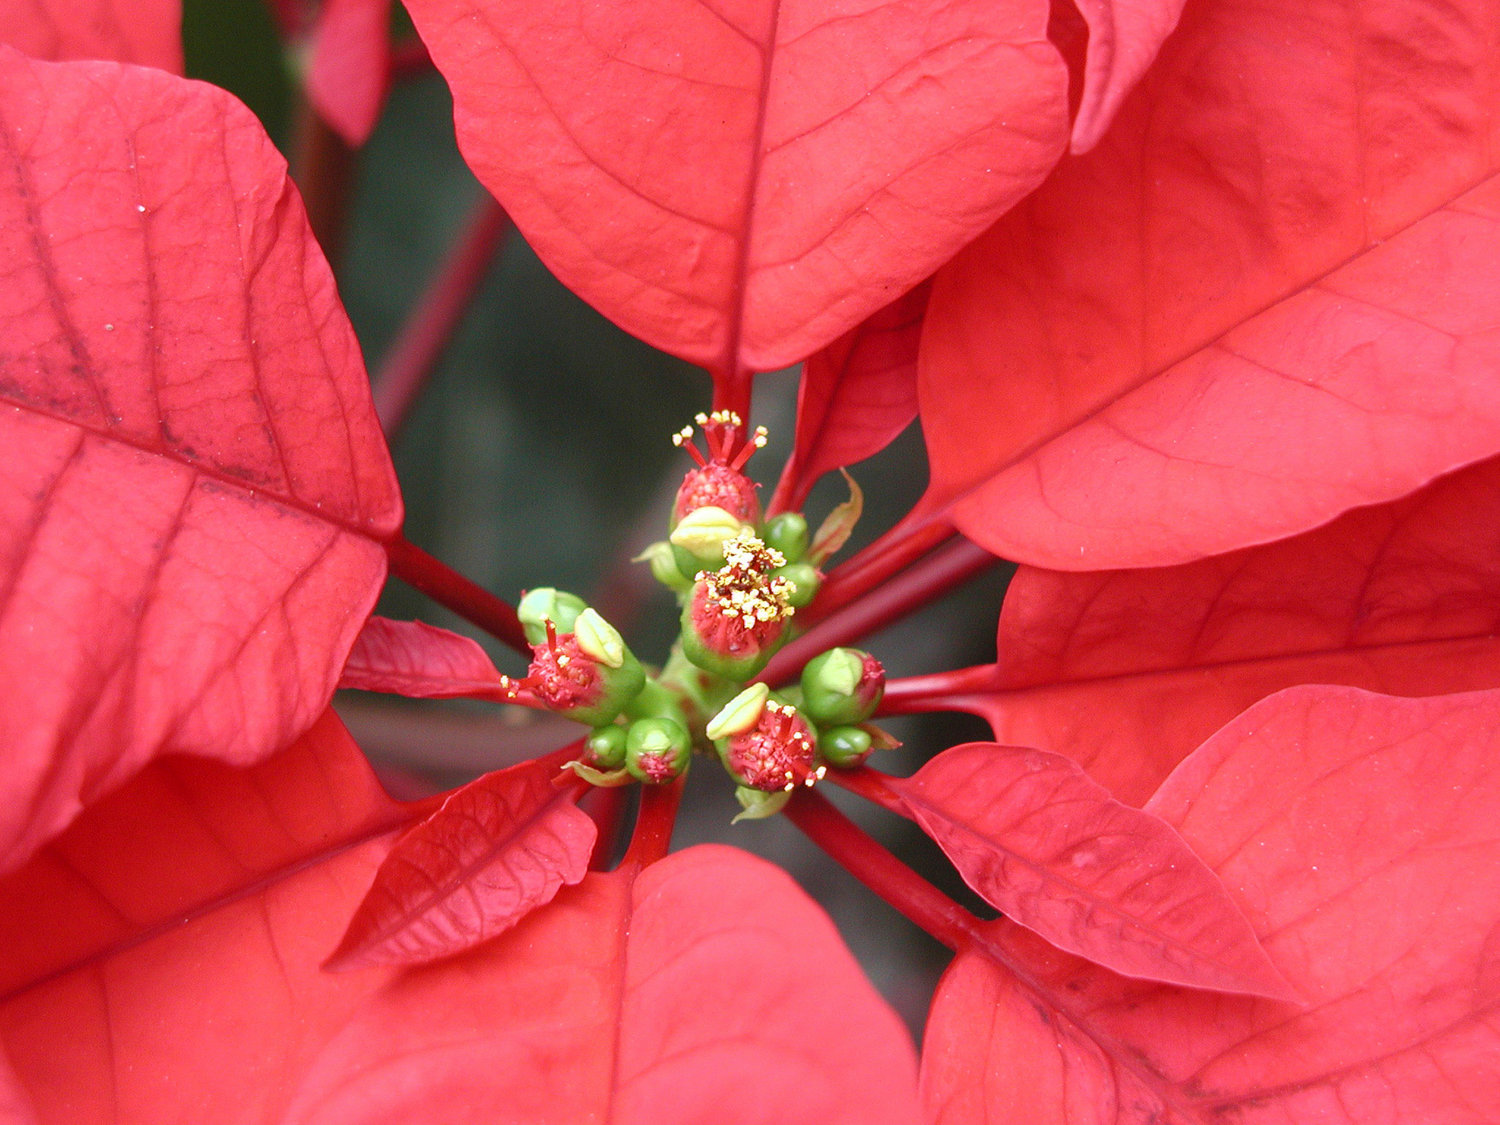 TECHNICALLY NOT TOXIC — The poinsettia is the most popular holiday plant, and technically, it’s not toxic. Its sap can cause skin irritation in humans. Pets can also be impacted by this sap, and if enough of the plant is ingested, pets can get sick. It’s best to also avoid poinsettia if you have pets.